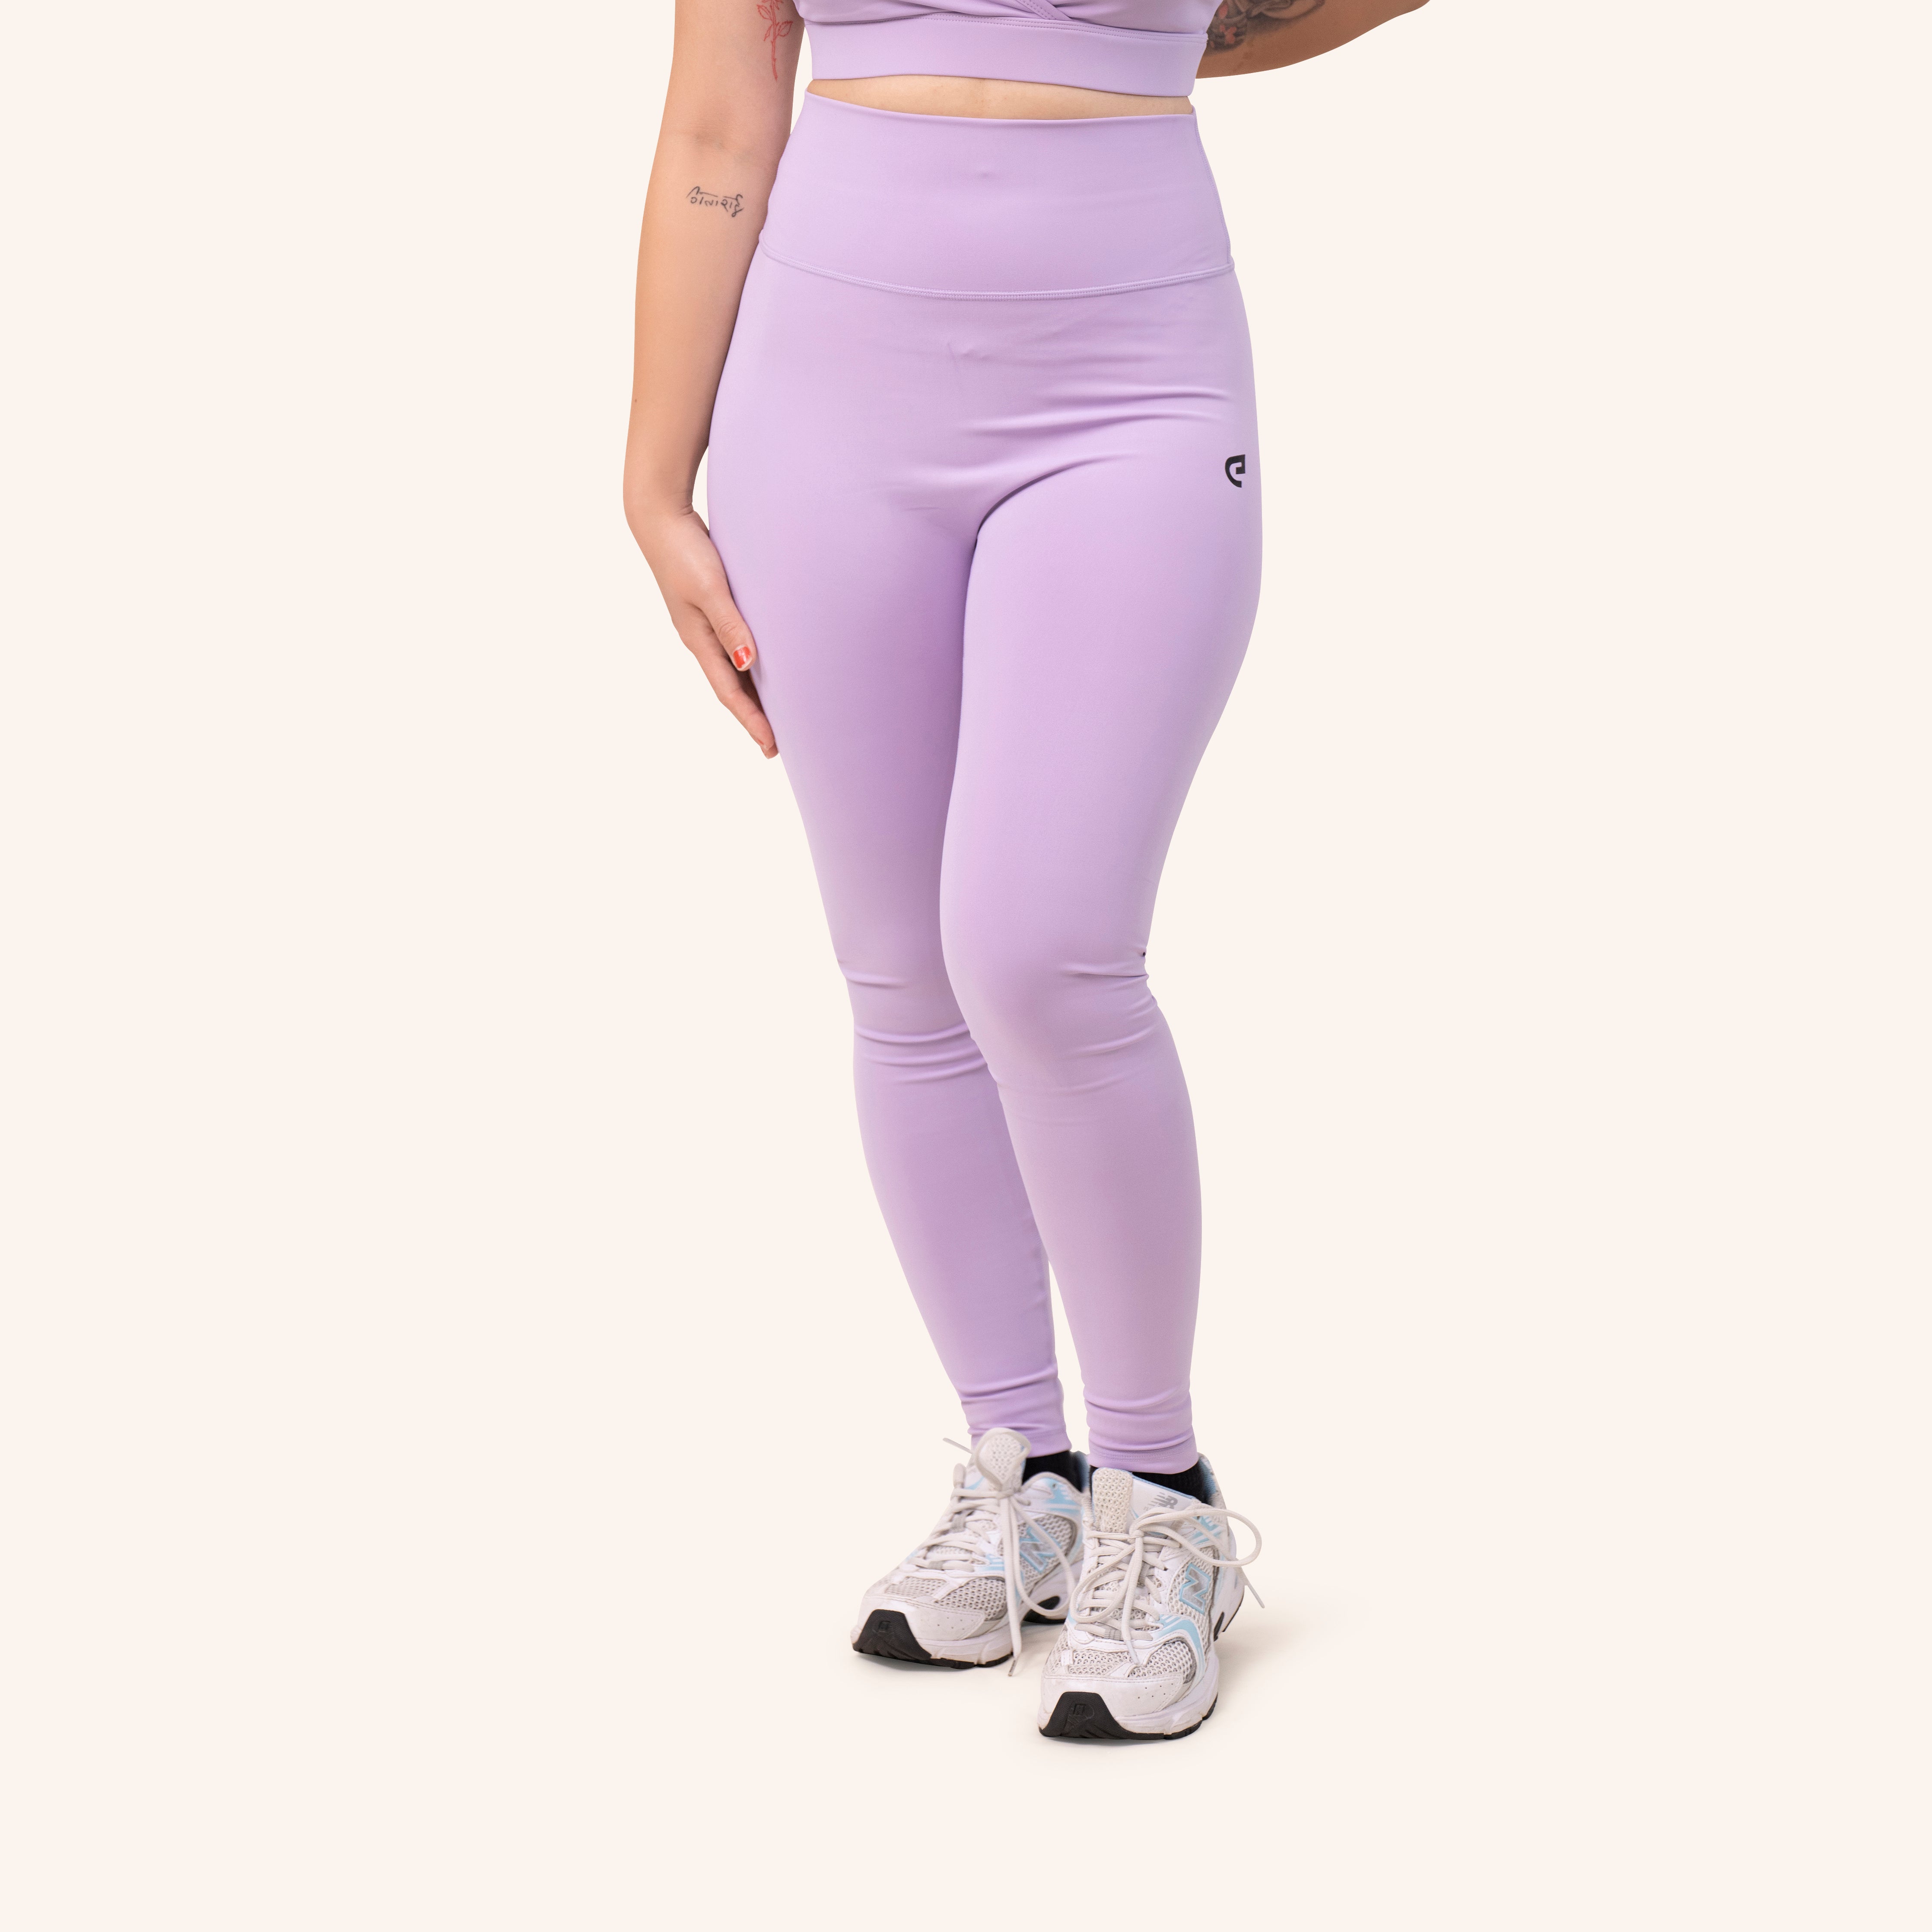 Andar Athletic Leggings Purple Size 8 - $40 (11% Off Retail) New With Tags  - From Kate